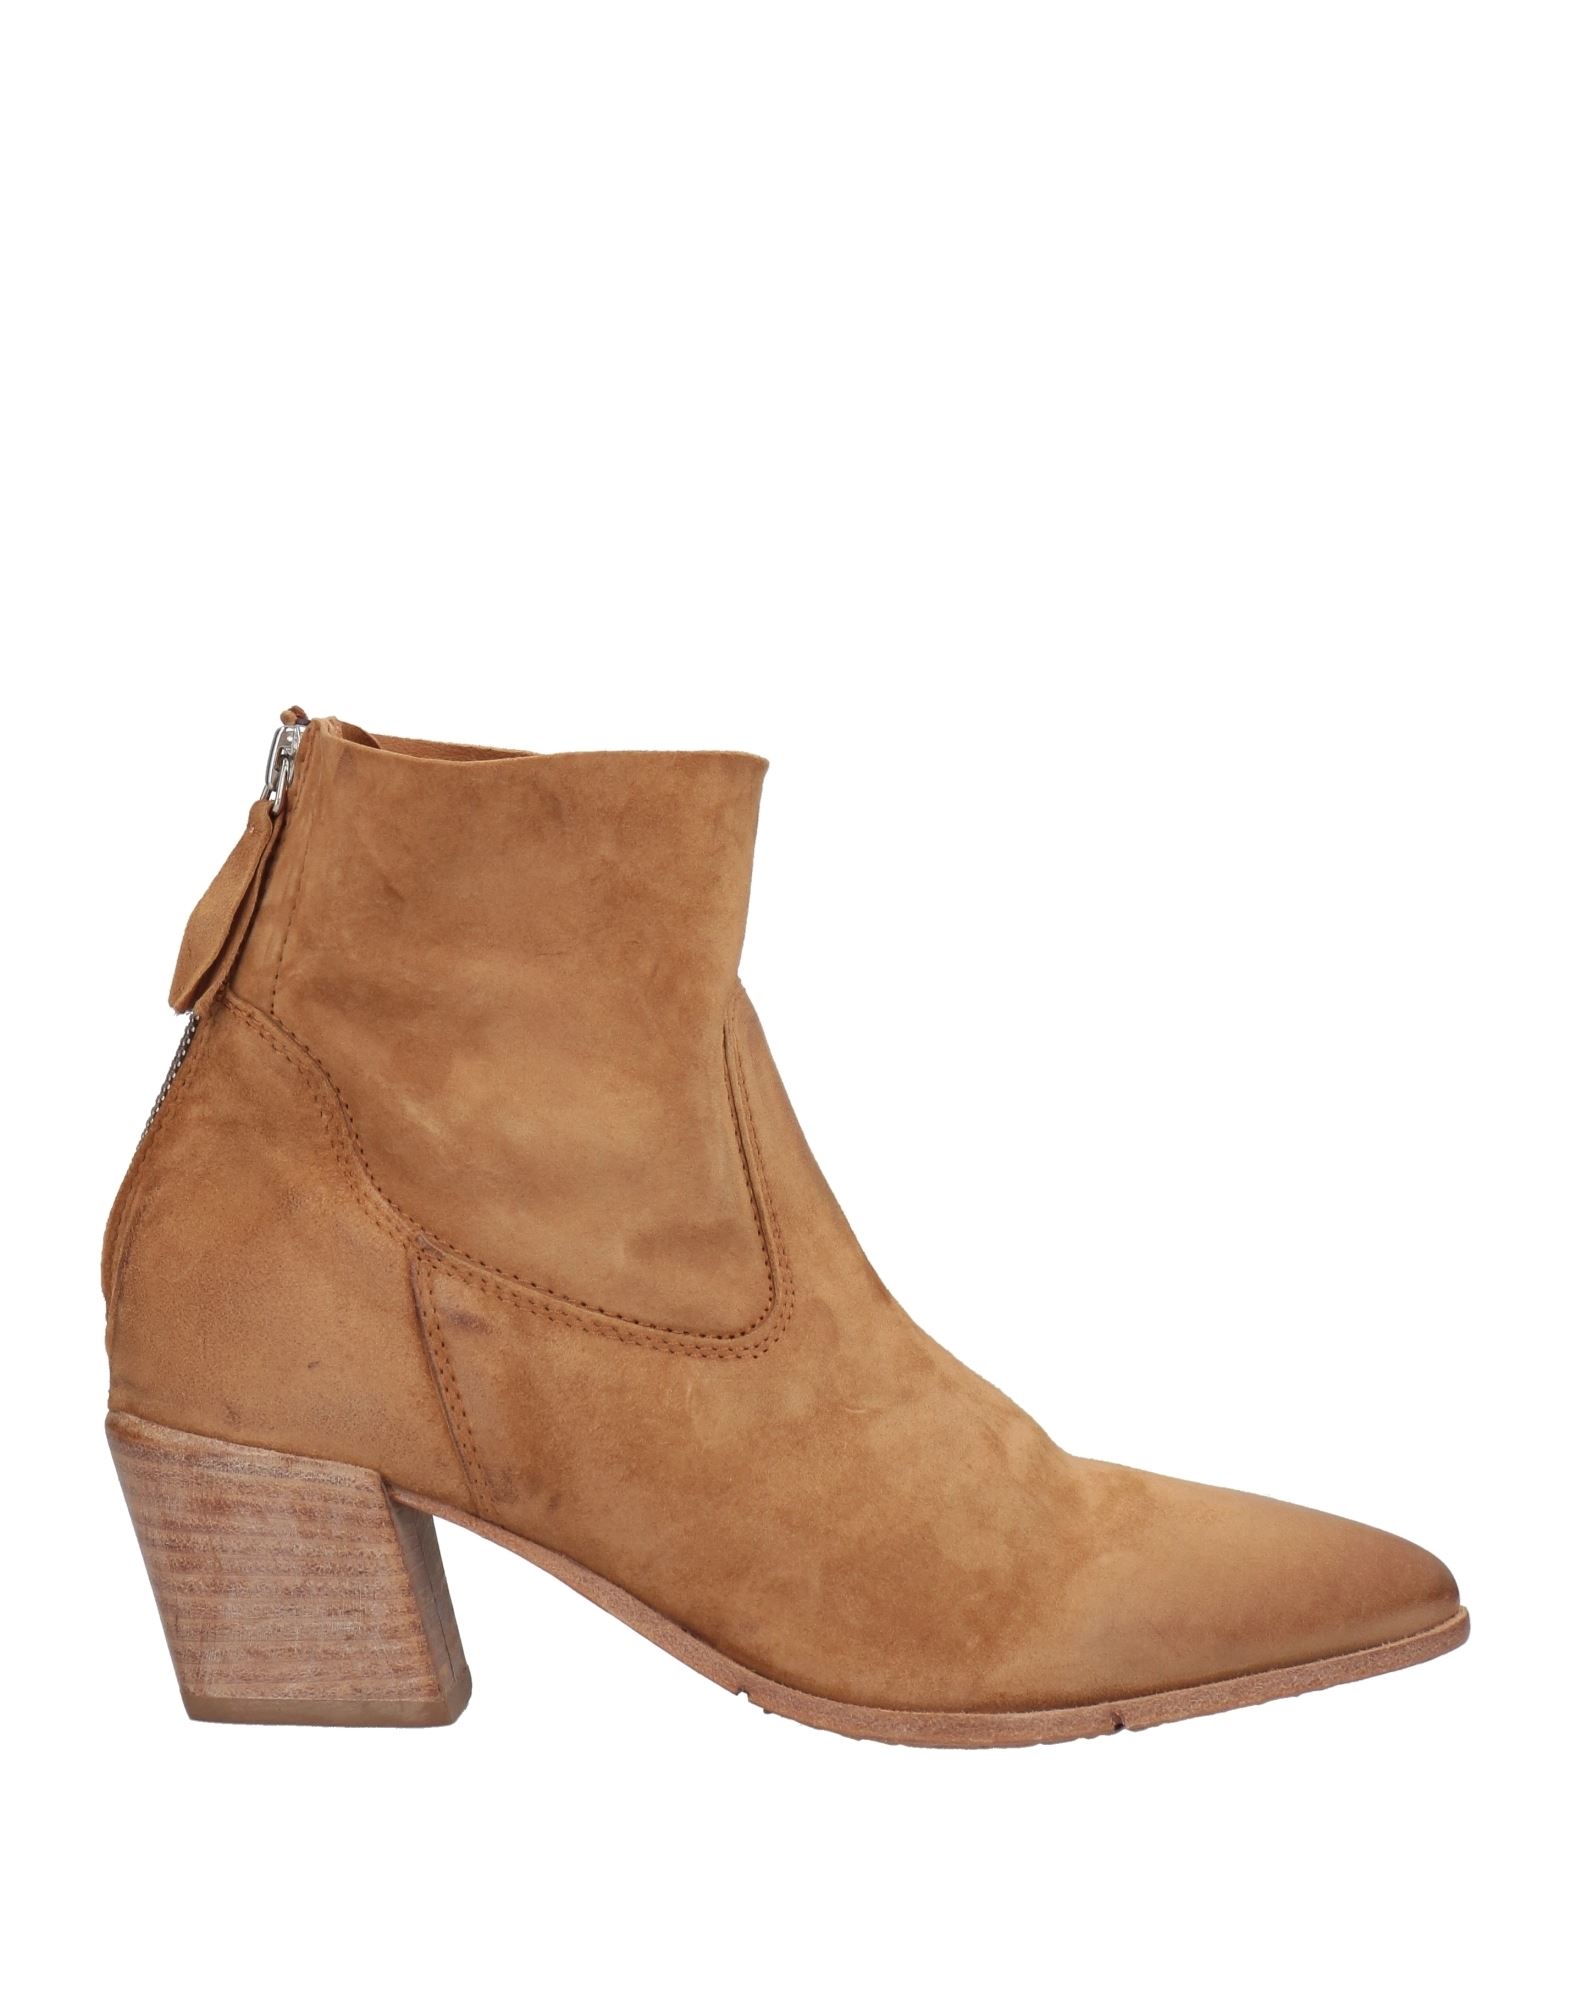 Moma Ankle Boots In Beige